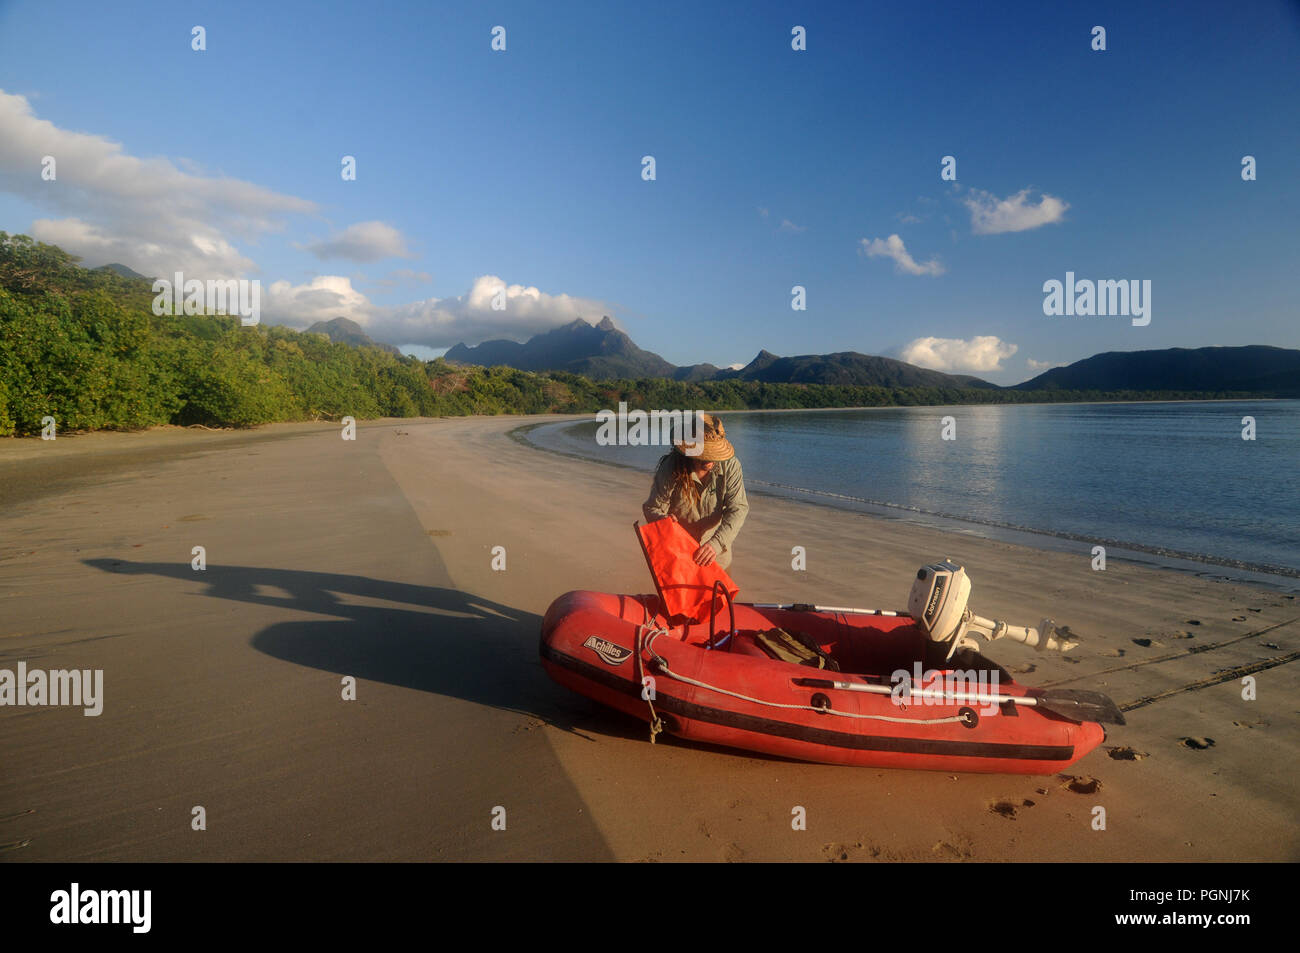 Man with red inflatable boat on remote beach, Zoe Bay, Hinchinbrook Island National Park, Queensland, Australia. NO MR or PR Stock Photo